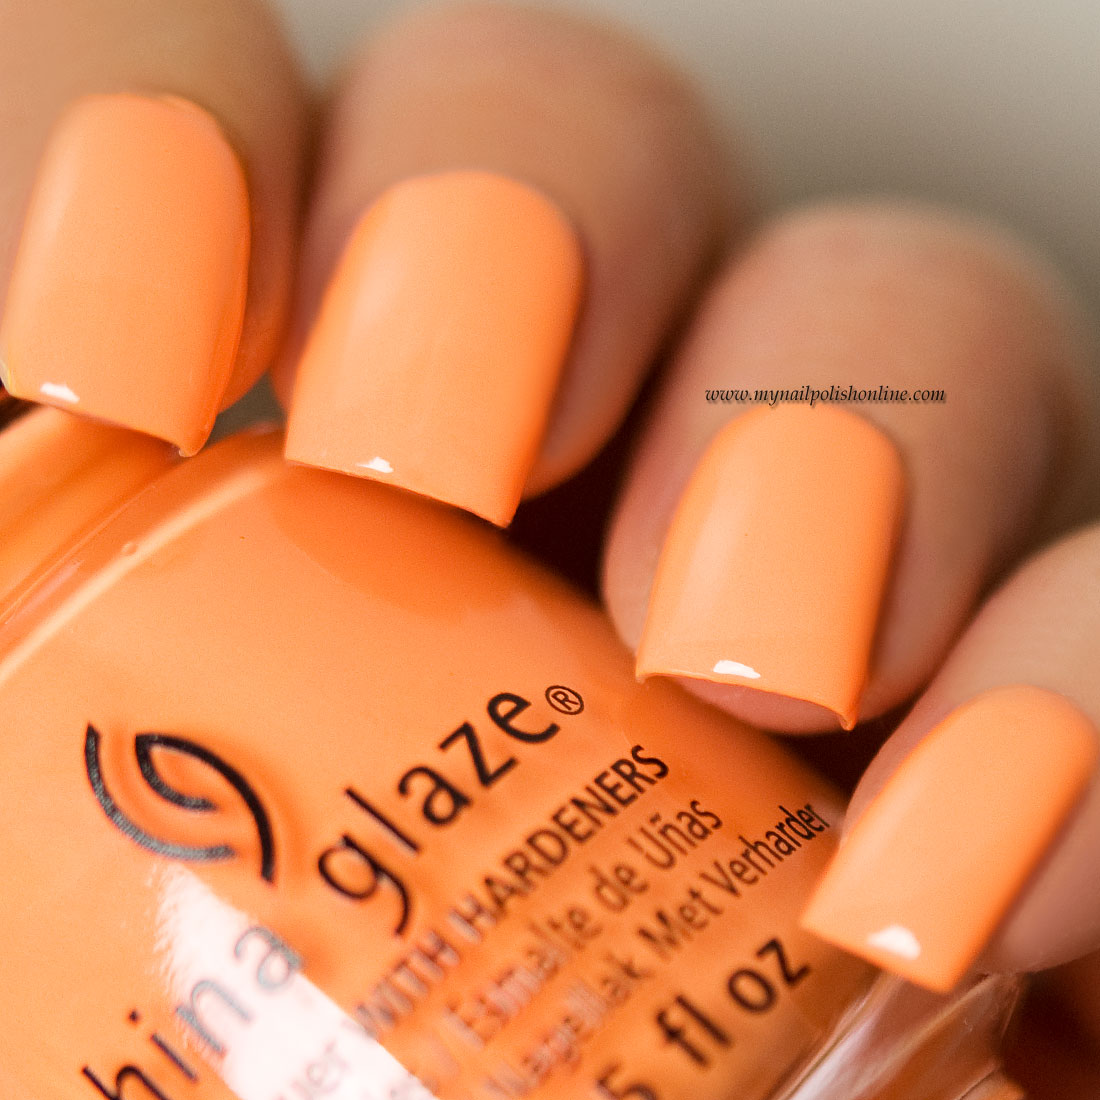 China Glaze - None of Your Risky Business